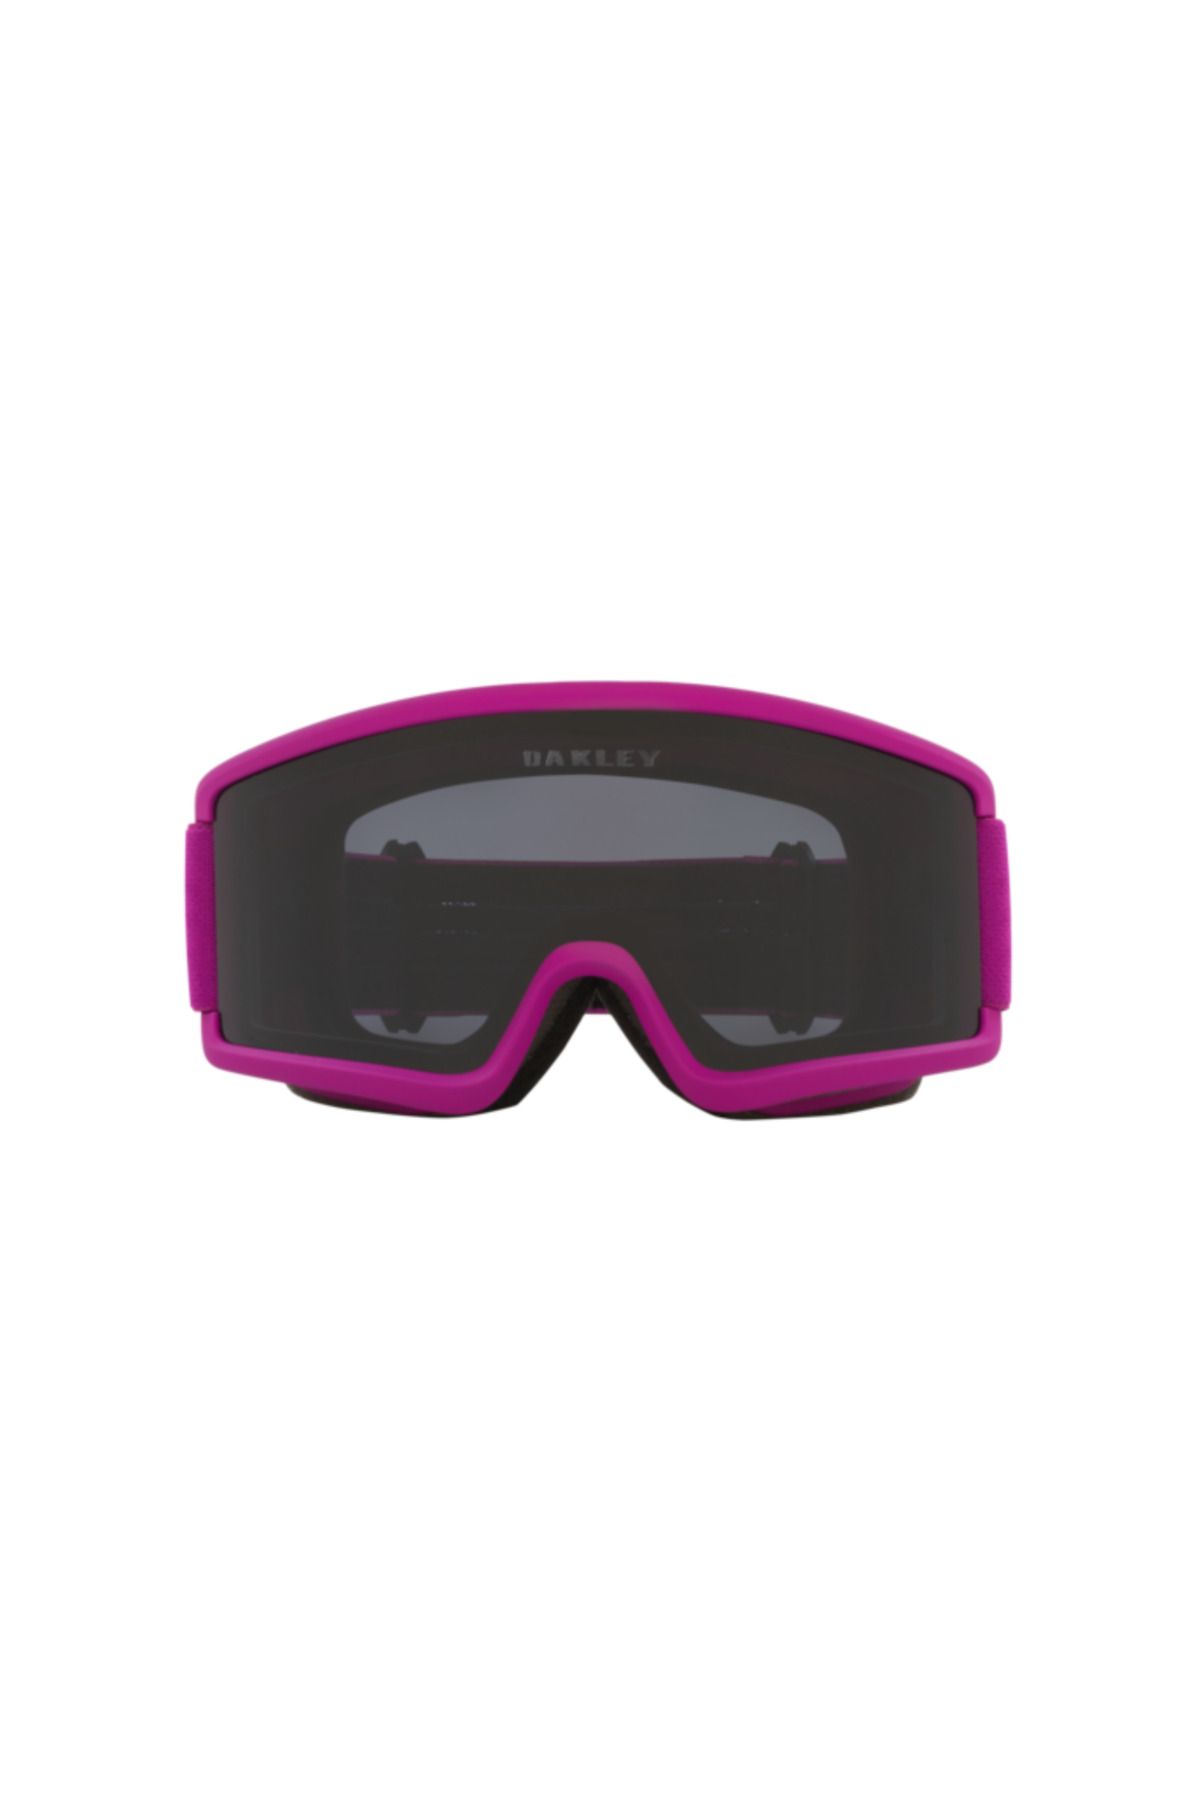 Oakley Snow Goggles 712212 TARGET LINE S